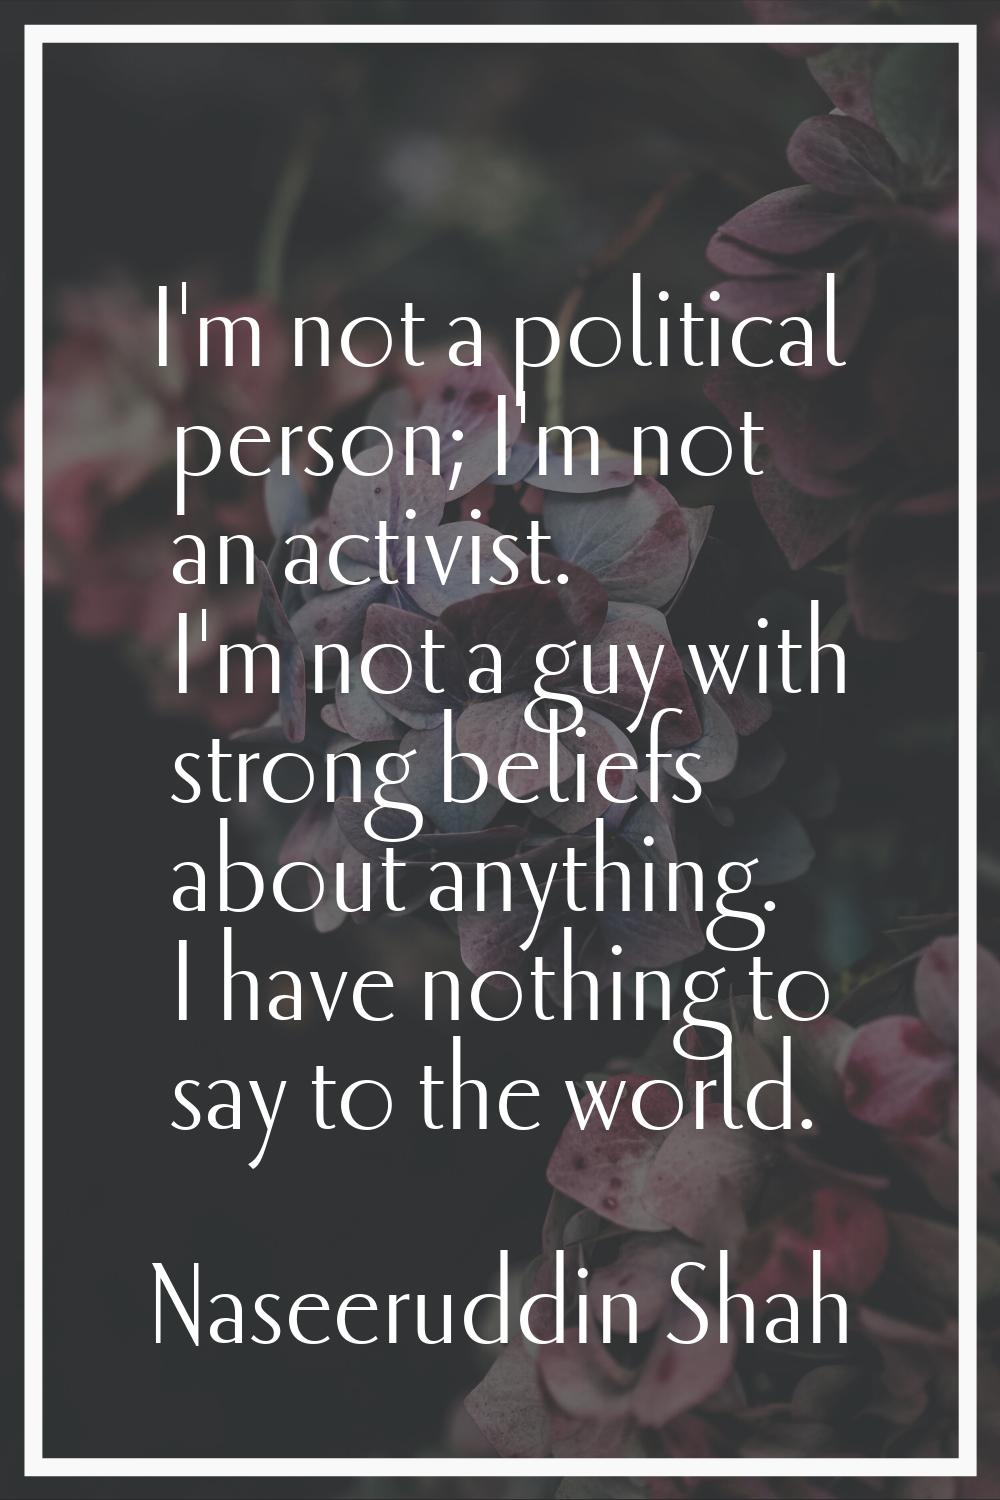 I'm not a political person; I'm not an activist. I'm not a guy with strong beliefs about anything. 